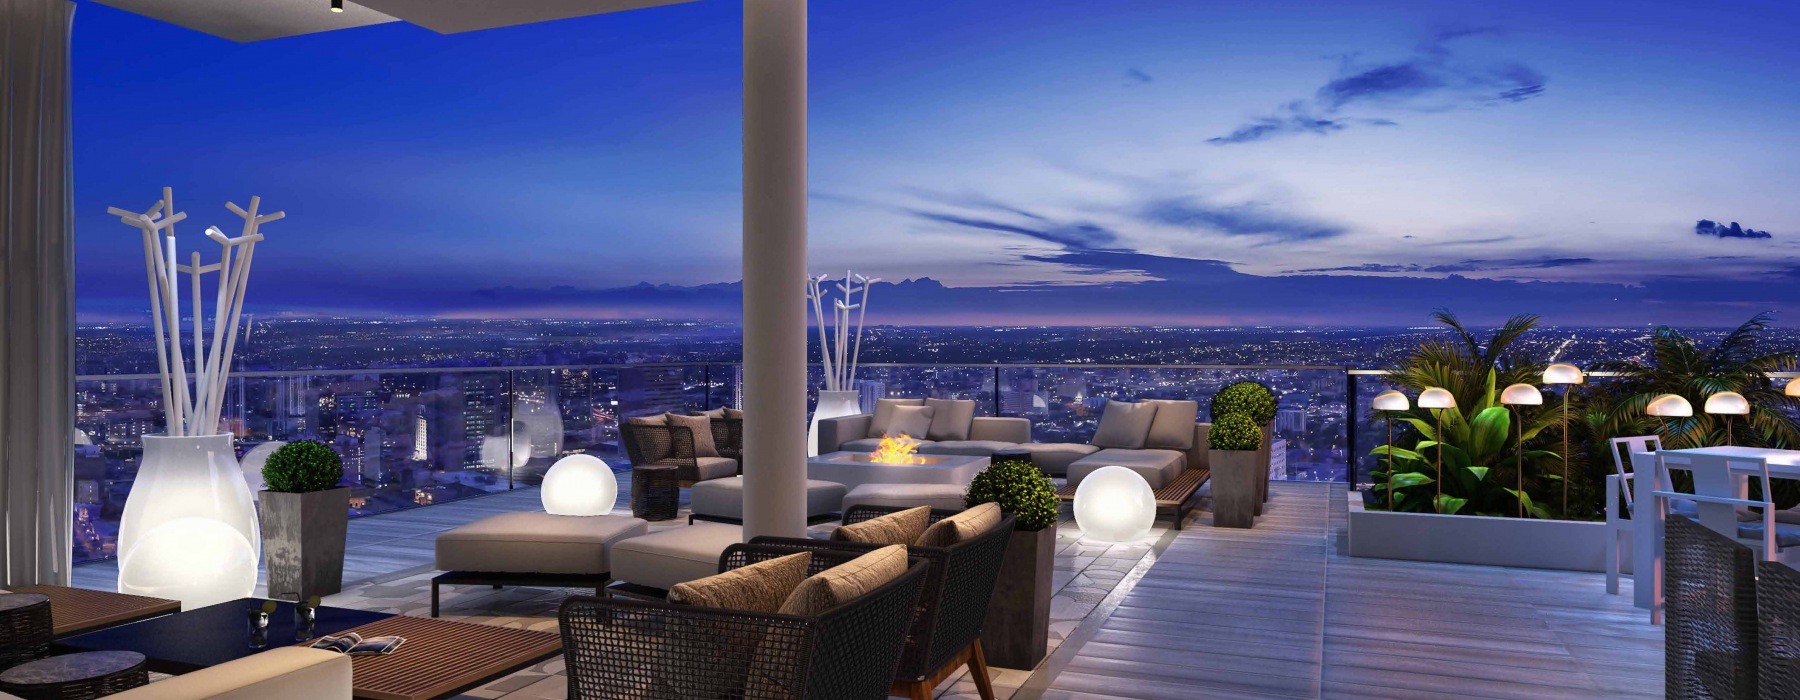 Rooftop lounge space with panoramic views